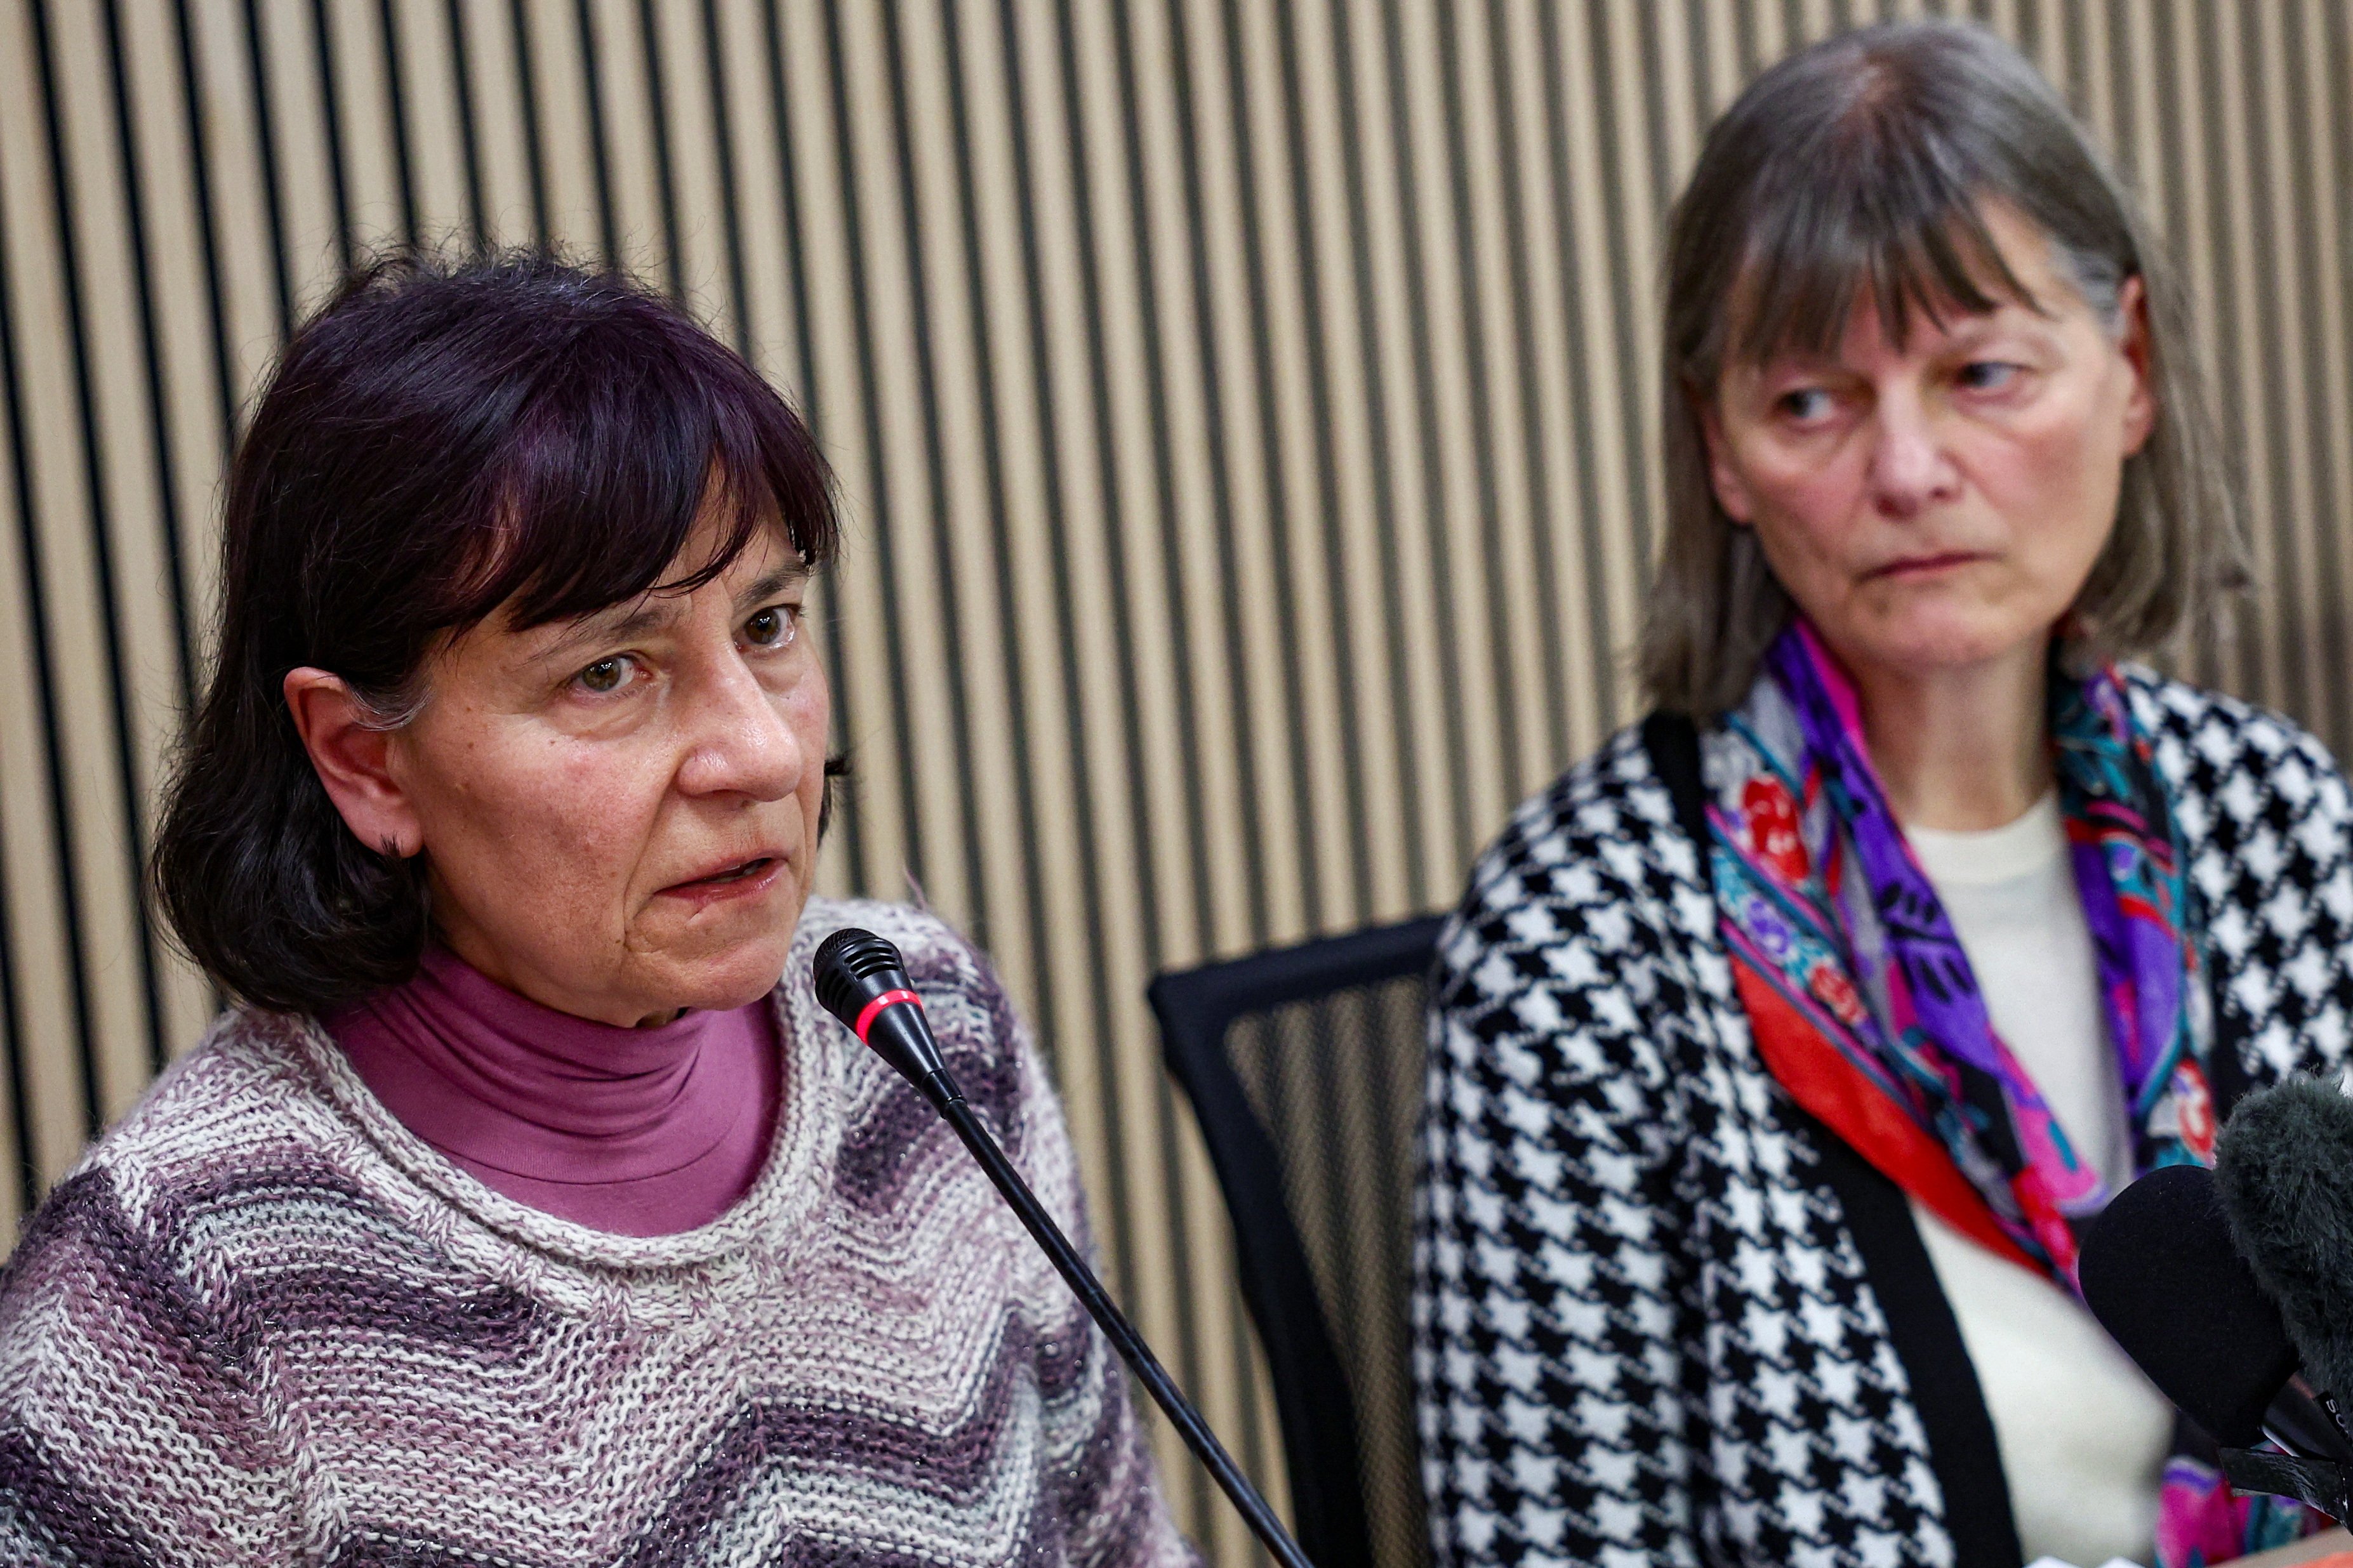 Former religious sisters Gloria Branciani (left) and Mirjam Kovac, who have accused Marko Rupnik of sex abuse, appear publicly for the first time at a press conference in Rome on Wednesday. Photo: Reuters